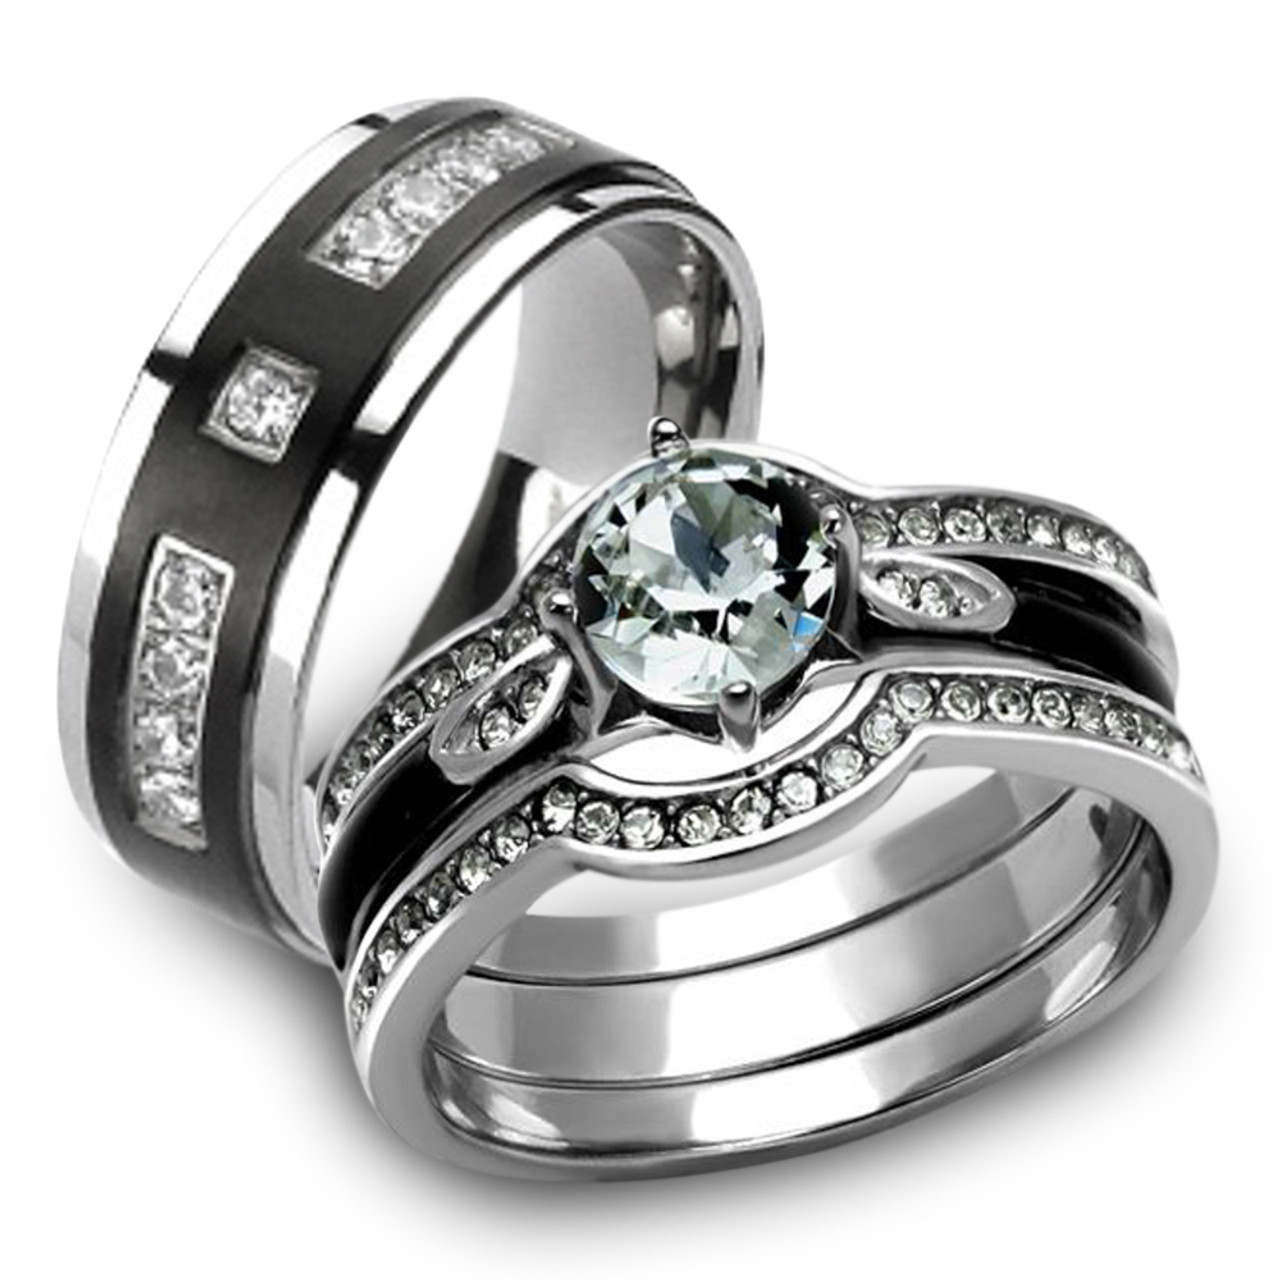 Her & His 4pc Silver & Black Stainless Steel & Titanium Wedding Ring ...